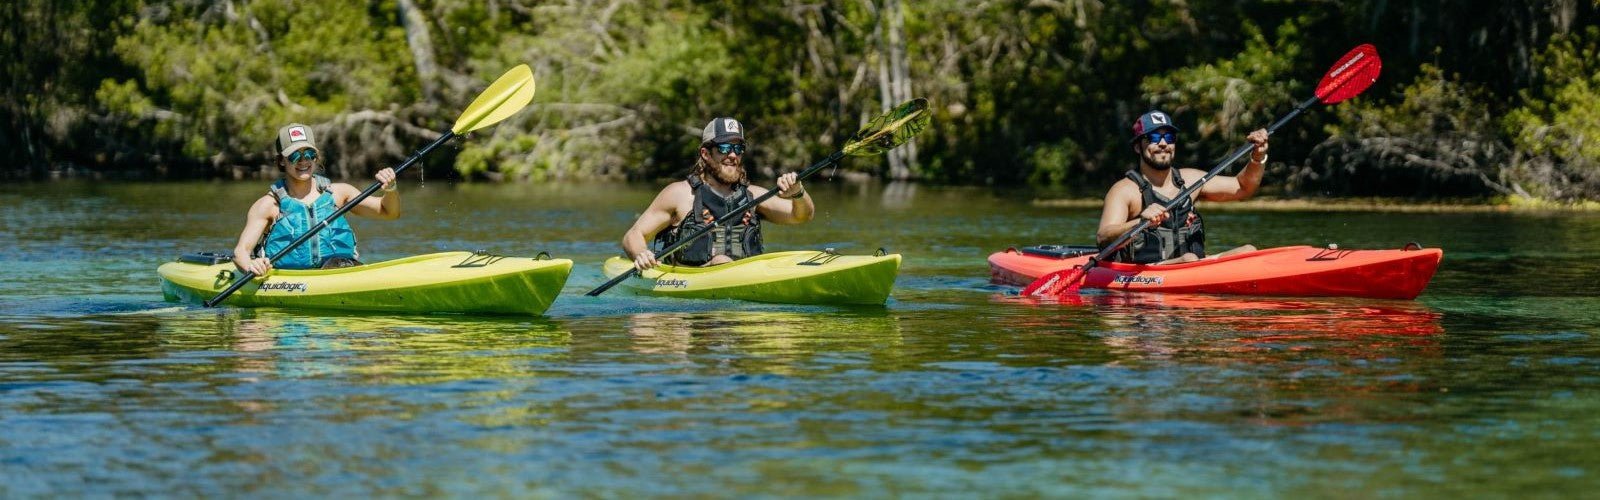 Top 3 Recreational Kayaks: A Comparative Review - Next Adventure